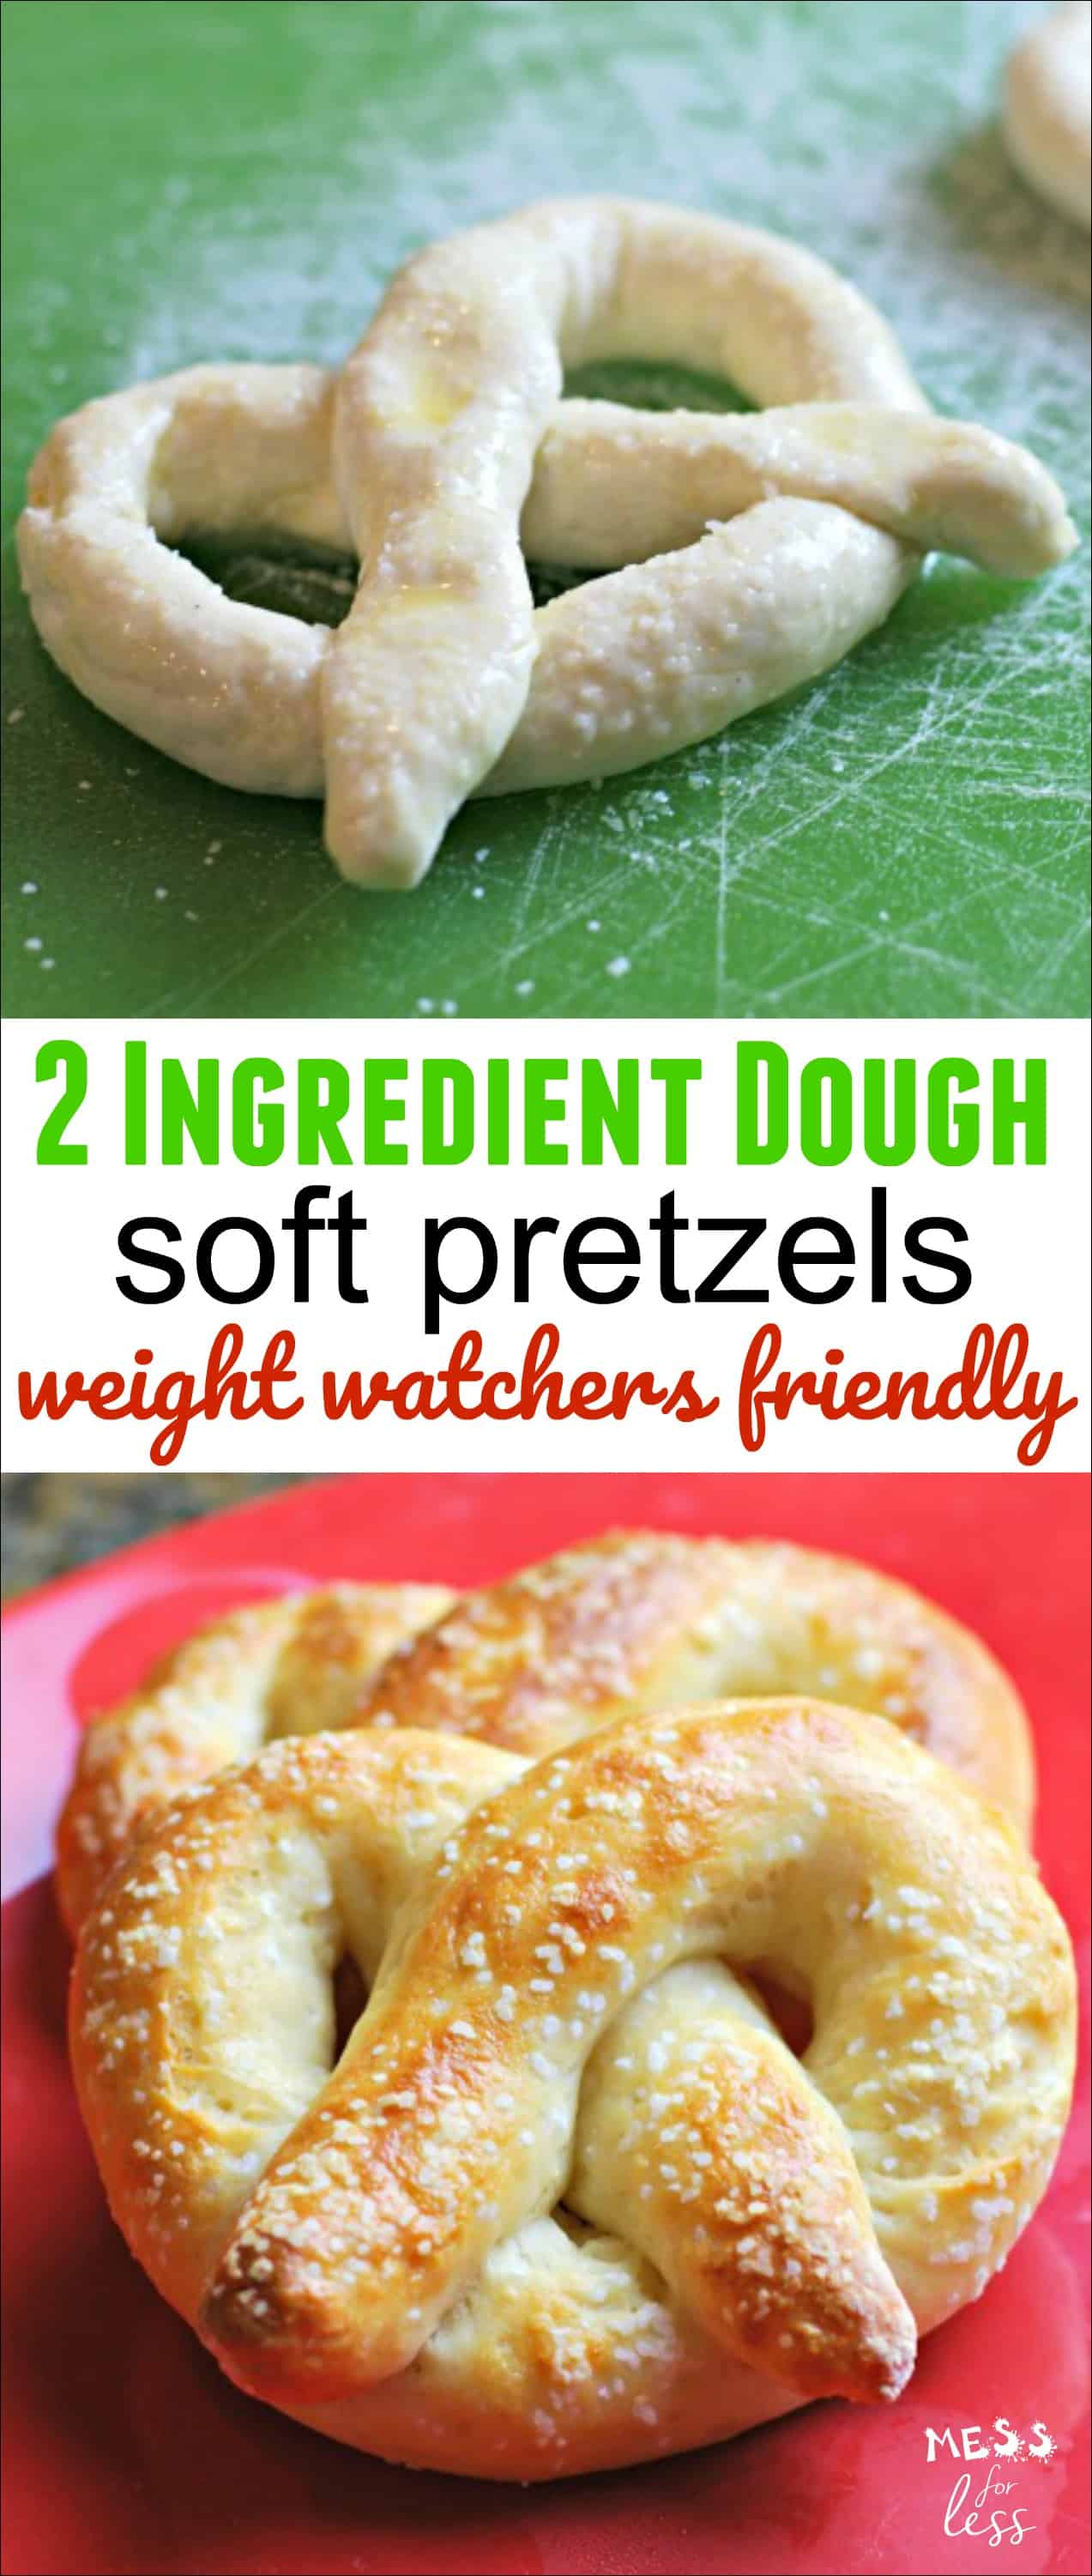 2 Ingredient Dough Pretzels - Weight Watchers friendly! This soft pretzel recipe is easy to make and will allow you to enjoy a pretzel with no guilt. Squeeze on some mustard and enjoy! #Weightwatchers #2ingredientdough #freestylerecipe